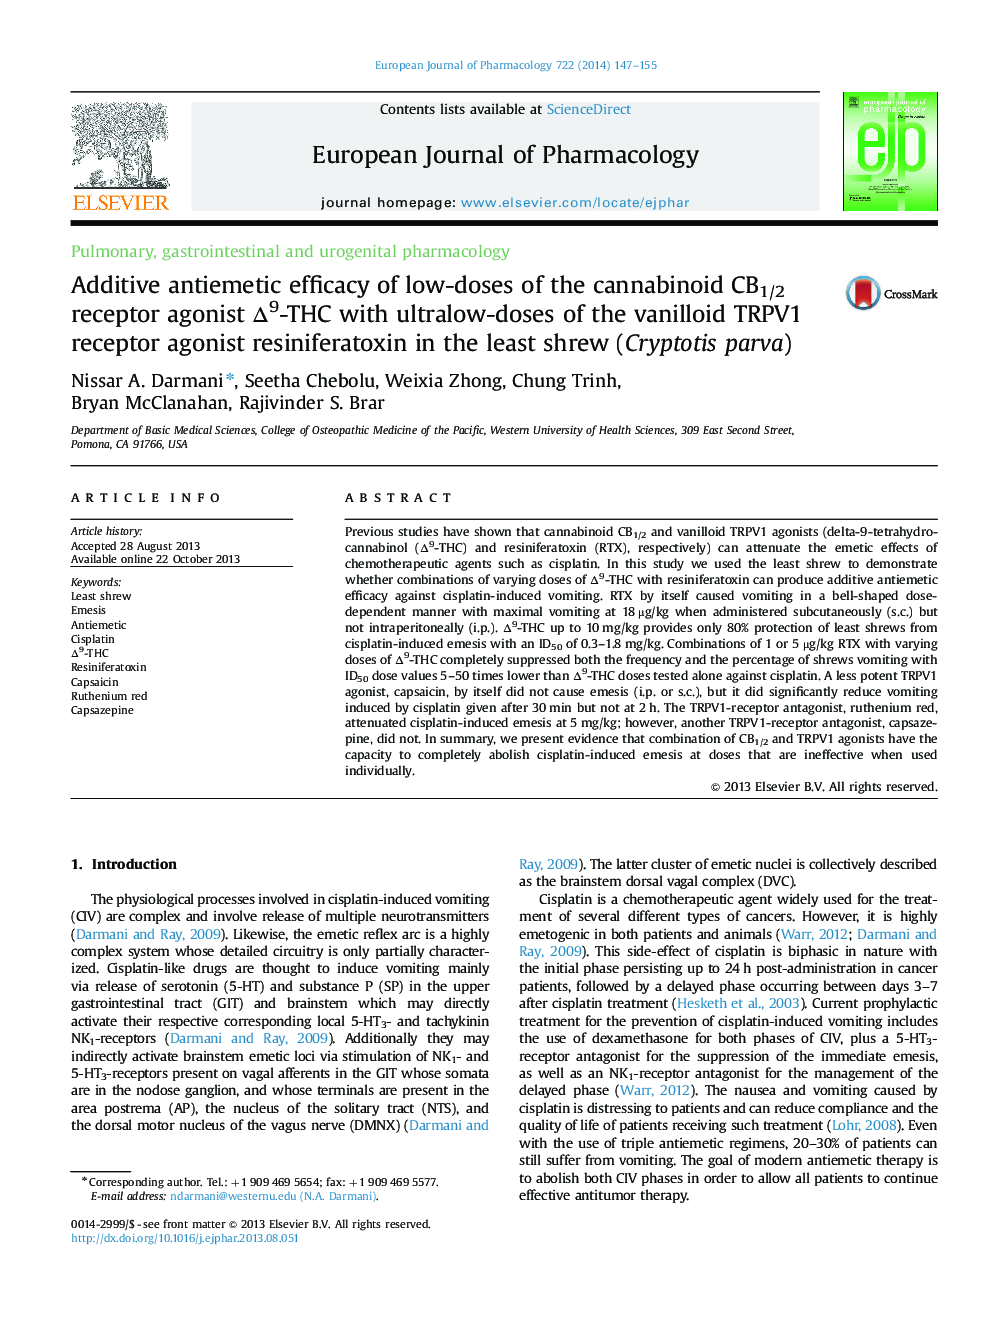 Additive antiemetic efficacy of low-doses of the cannabinoid CB1/2 receptor agonist Δ9-THC with ultralow-doses of the vanilloid TRPV1 receptor agonist resiniferatoxin in the least shrew (Cryptotis parva)